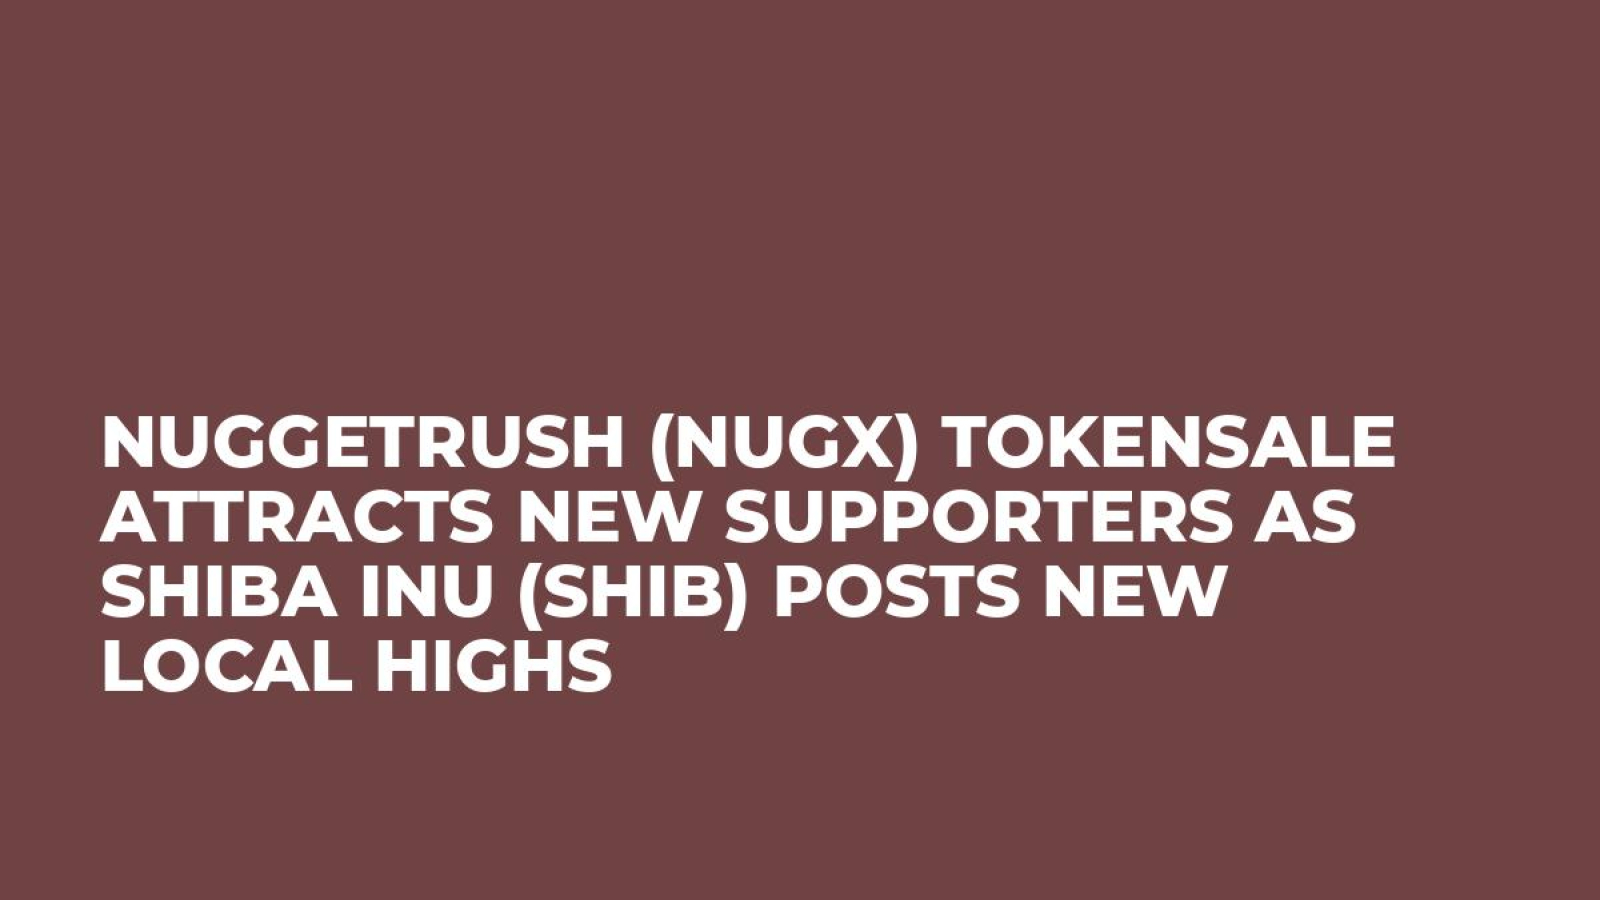 NuggetRush (NUGX) Tokensale Attracts New Supporters as Shiba Inu (SHIB) Posts New Local Highs